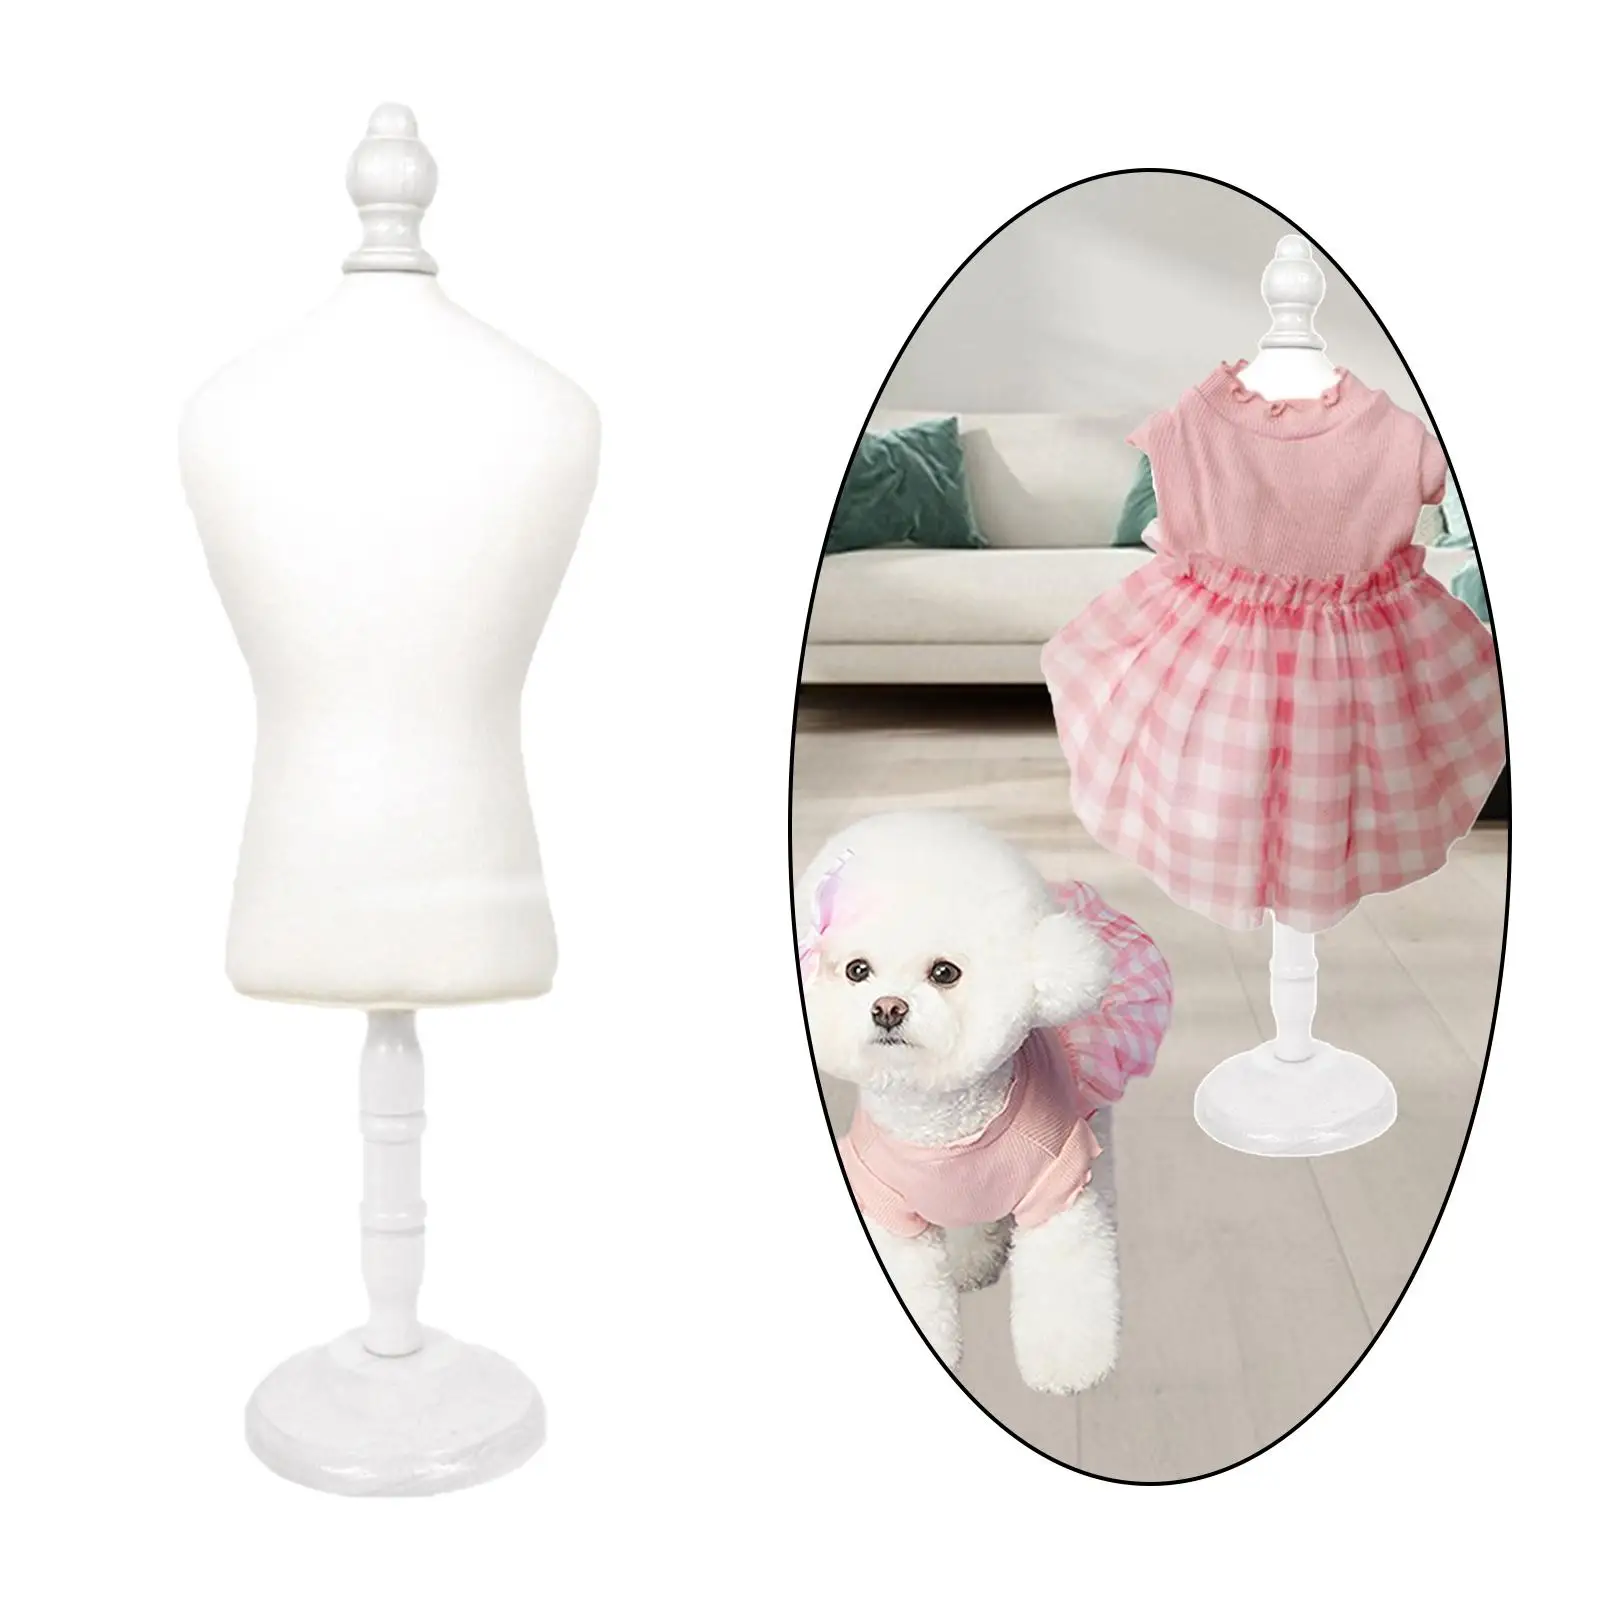  Display Holder  Model Stand Accessories with Round Wooden Base Support Tools Miniature for Dress Display Clothes Sewing